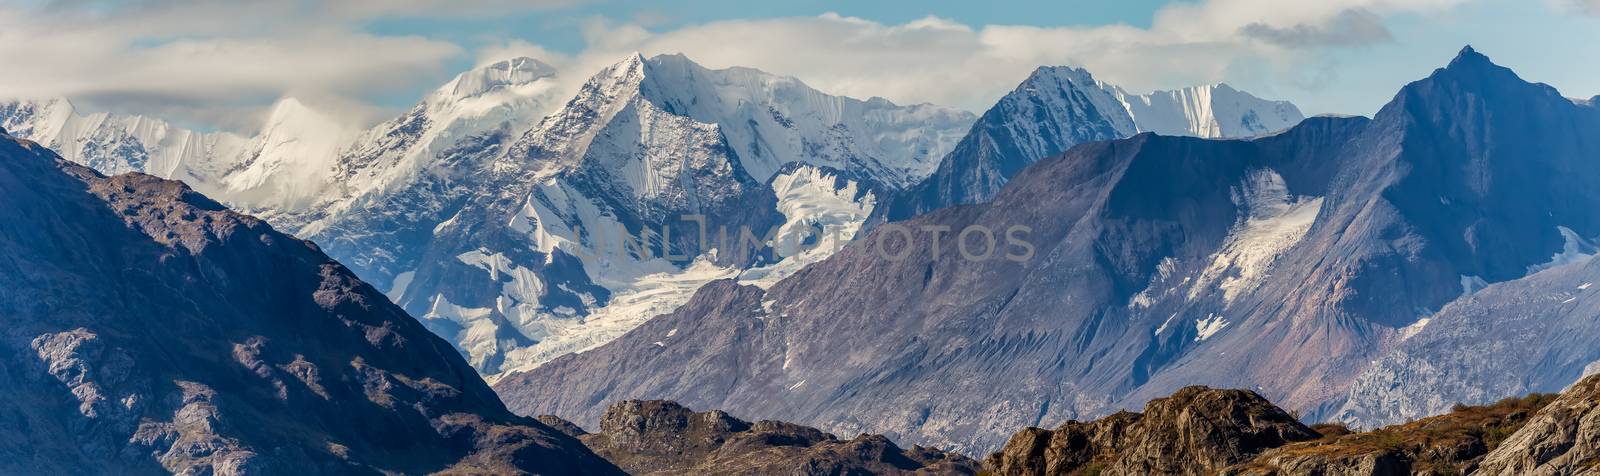 Beautiful panorama of massive mountains and snowy peaks by DamantisZ